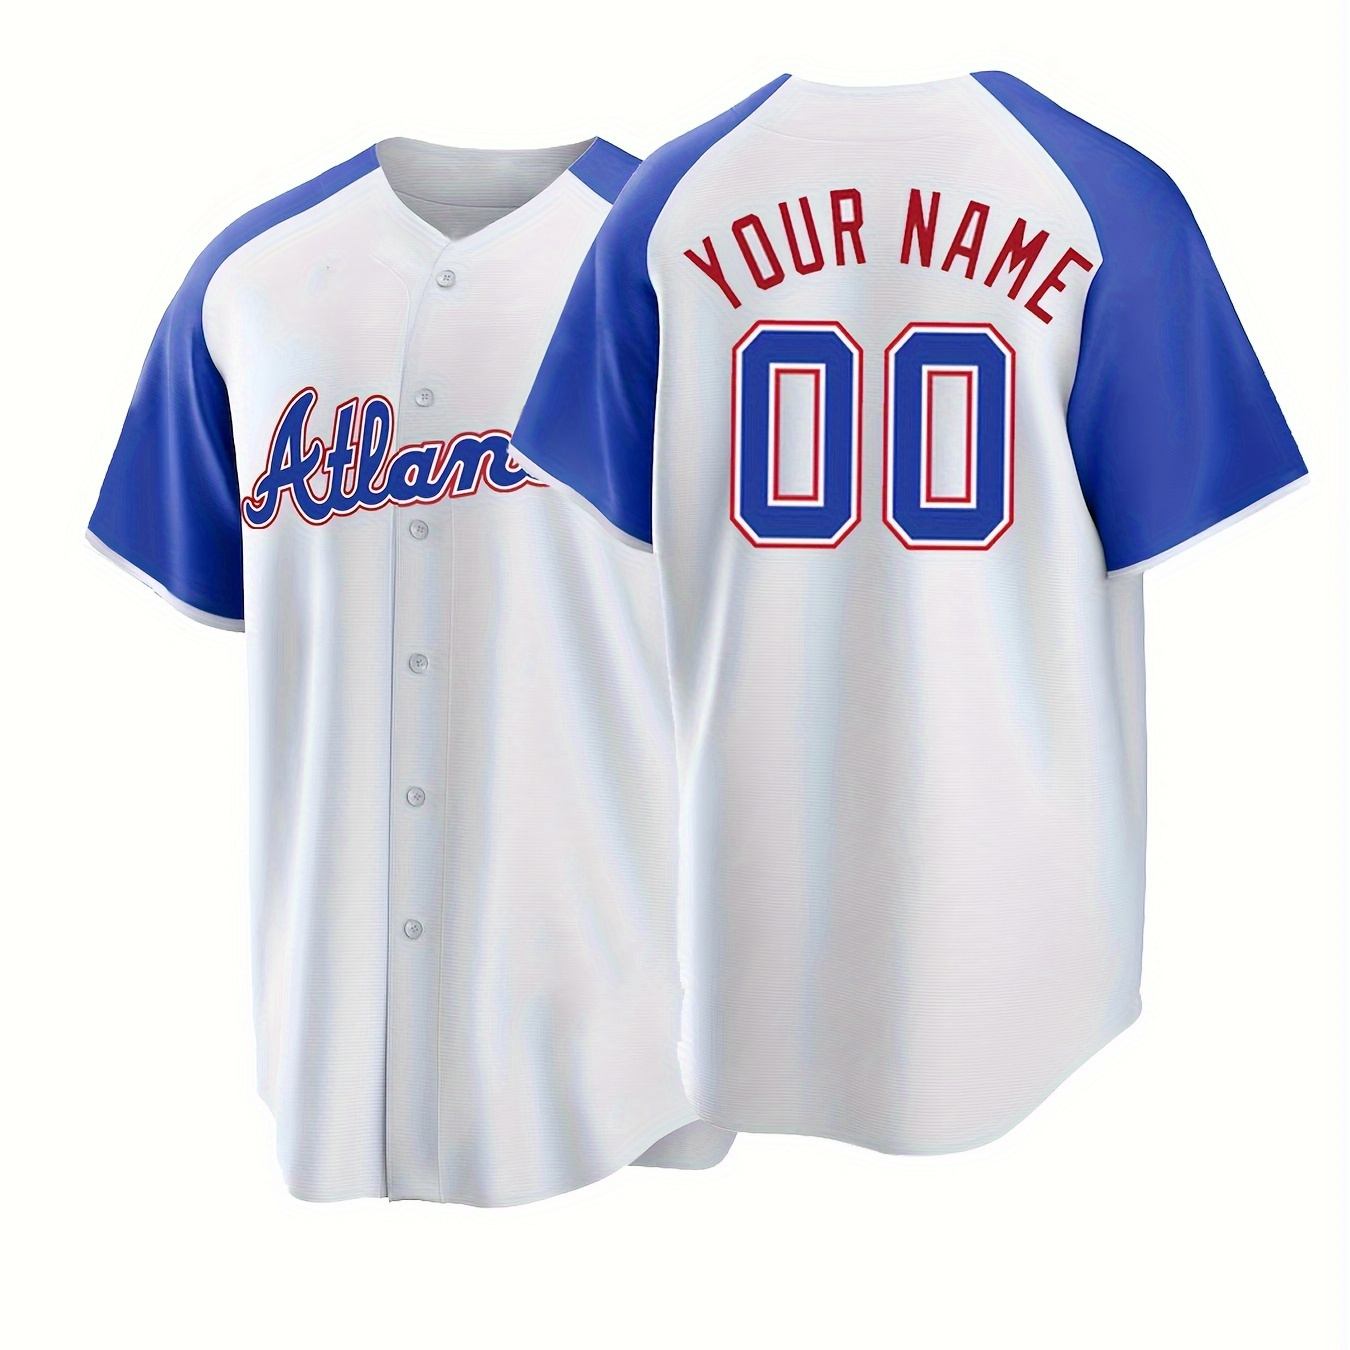 

Customized Name And Number Embroidery, Men's Color Block V-neck Baseball Jersey, Daily Outdoor Leisure Sports Shirt